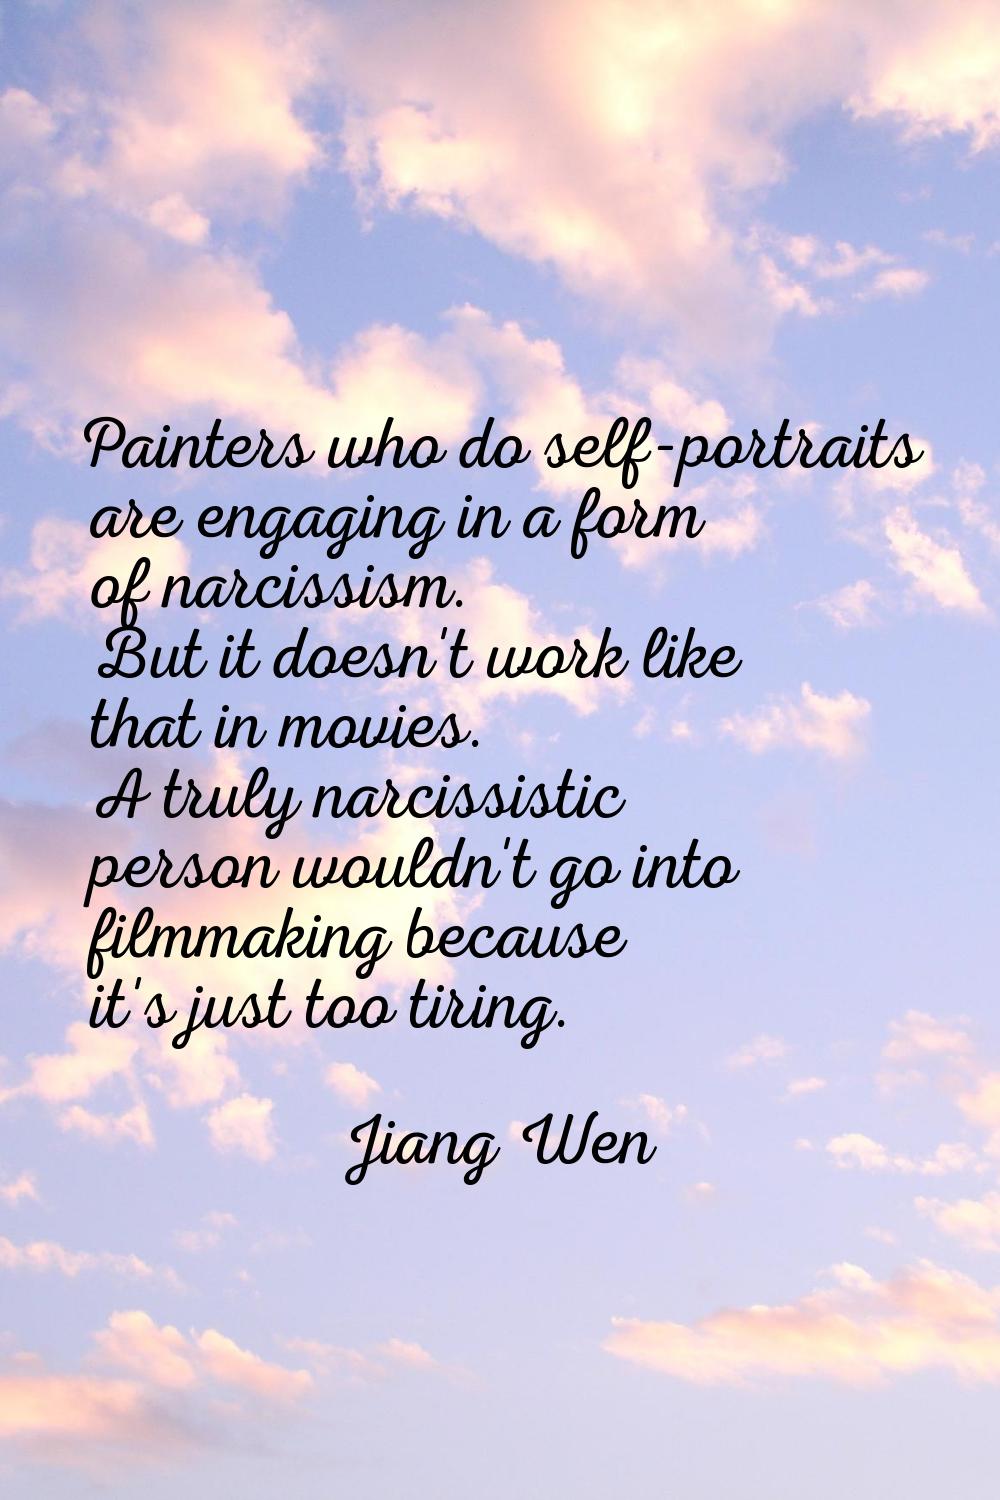 Painters who do self-portraits are engaging in a form of narcissism. But it doesn't work like that 